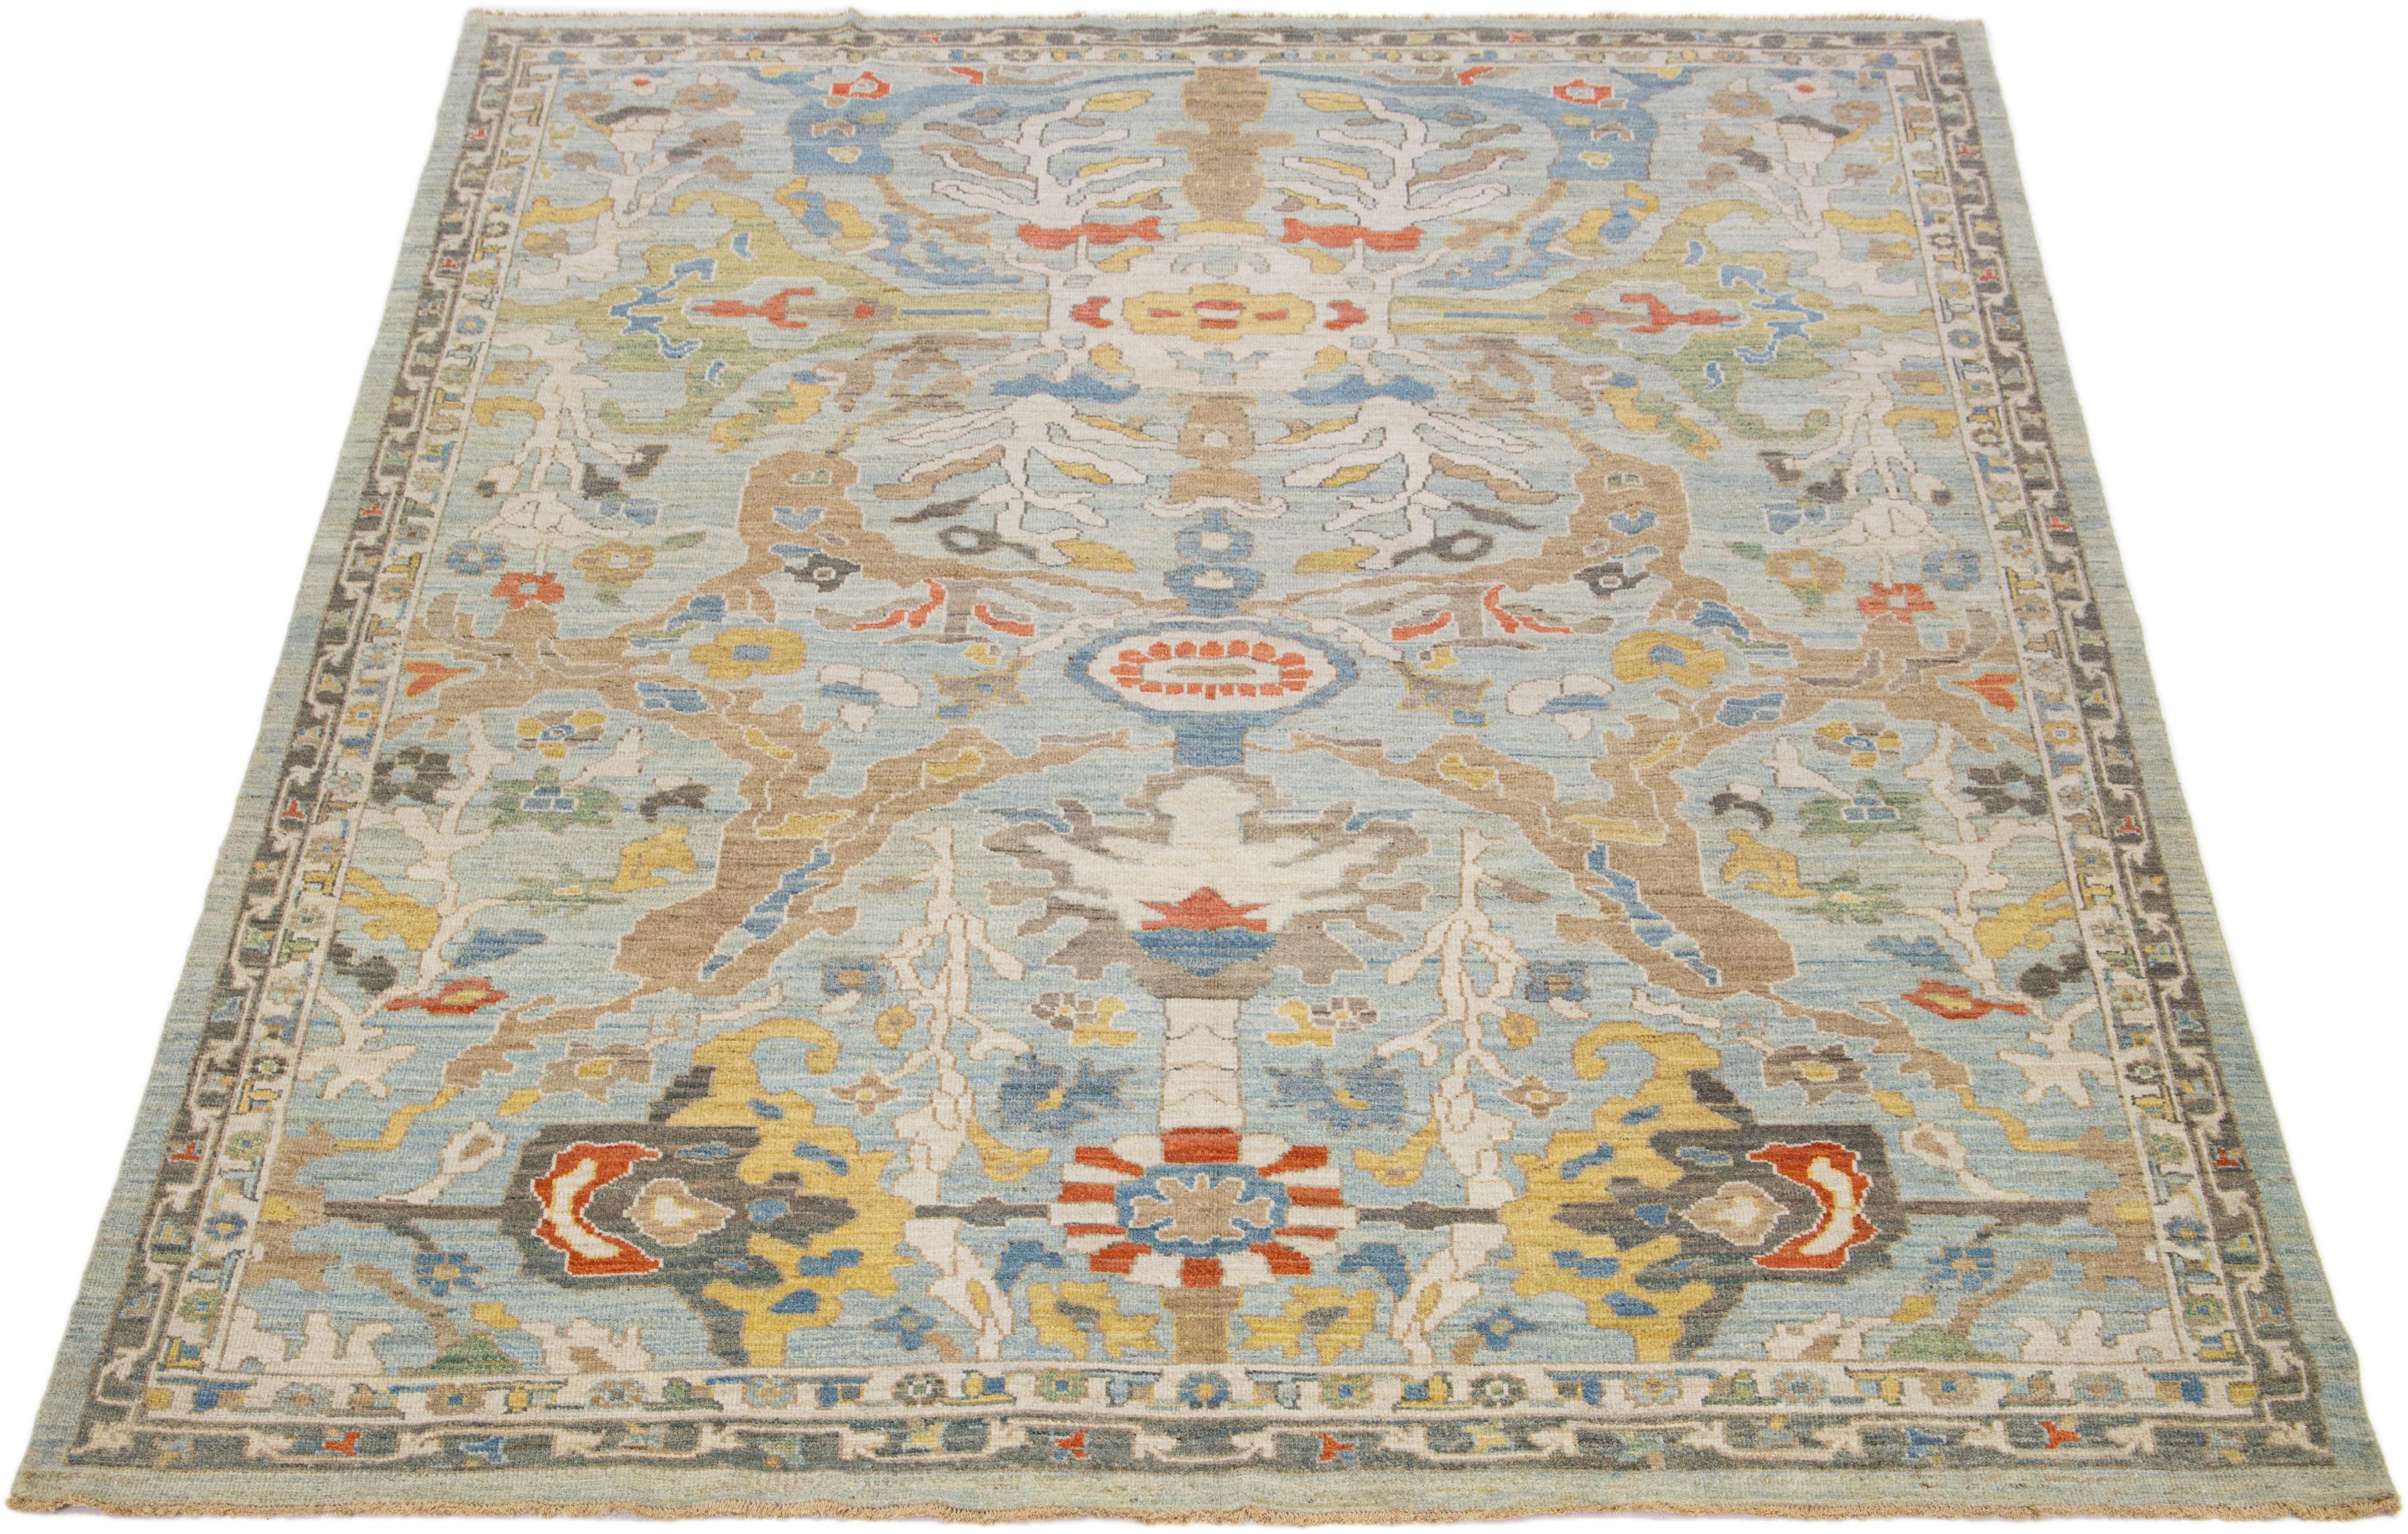 This modern reinterpretation of timeless Sultanabad design is beautifully manifested in an exquisitely hand-knotted wool rug, resplendent in its striking light blue shade. An intricate delineates its all-over floral embroidery, embellished with